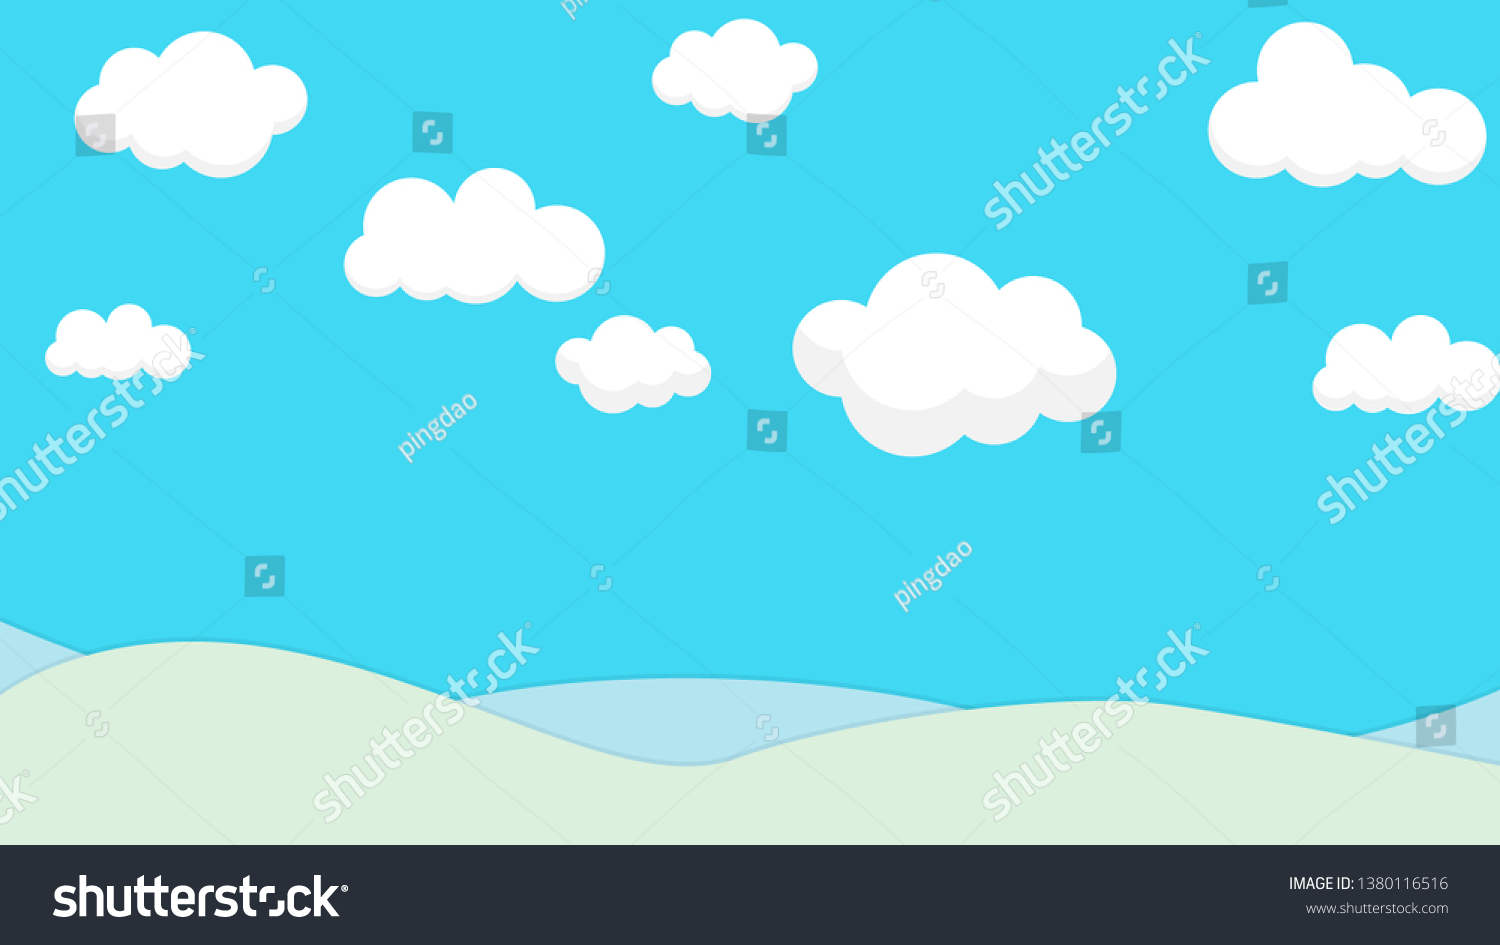 Blue Sky Clouds Cartoon Style Vector Stock Vector Royalty Free 1380116516 Shutterstock 4414